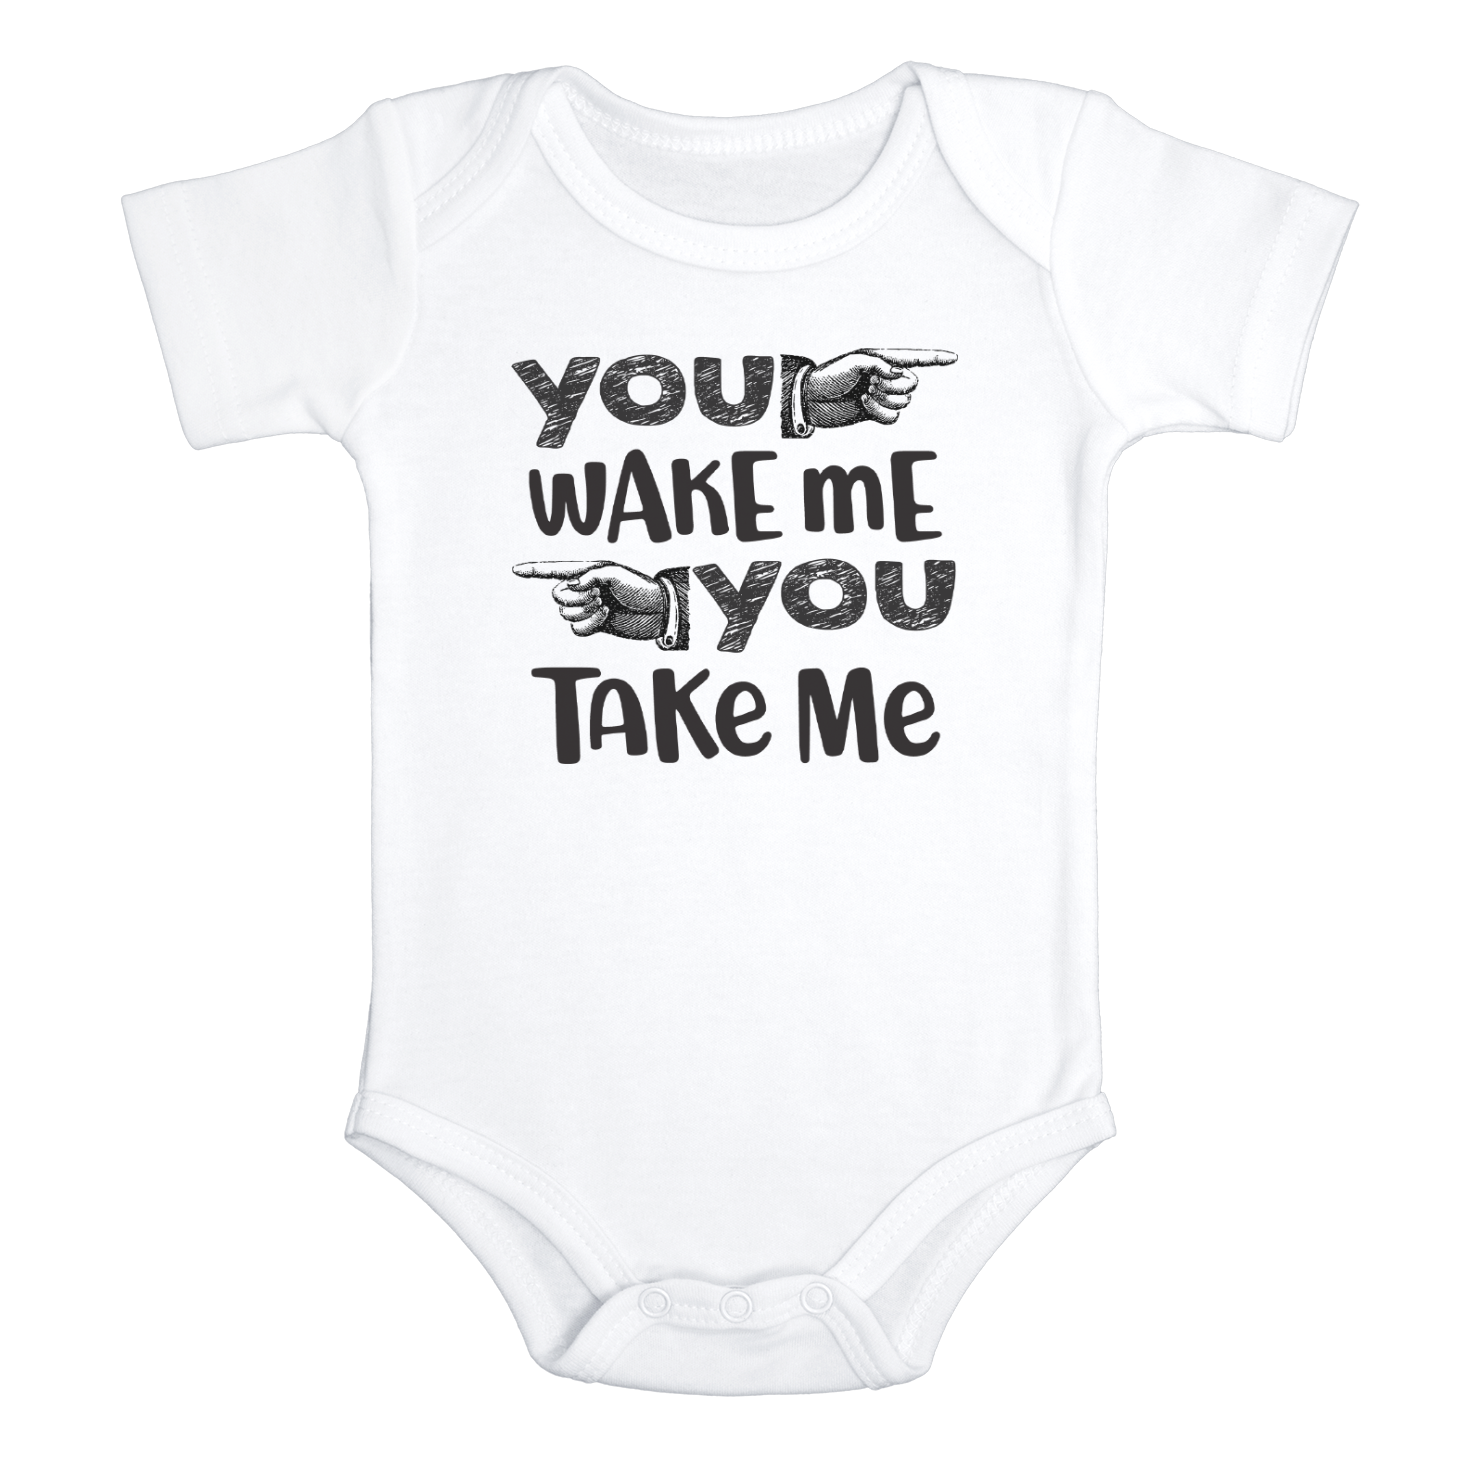 YOU WAKE ME YOU TAKE ME Funny baby onesies bodysuit (white: short or long sleeve)